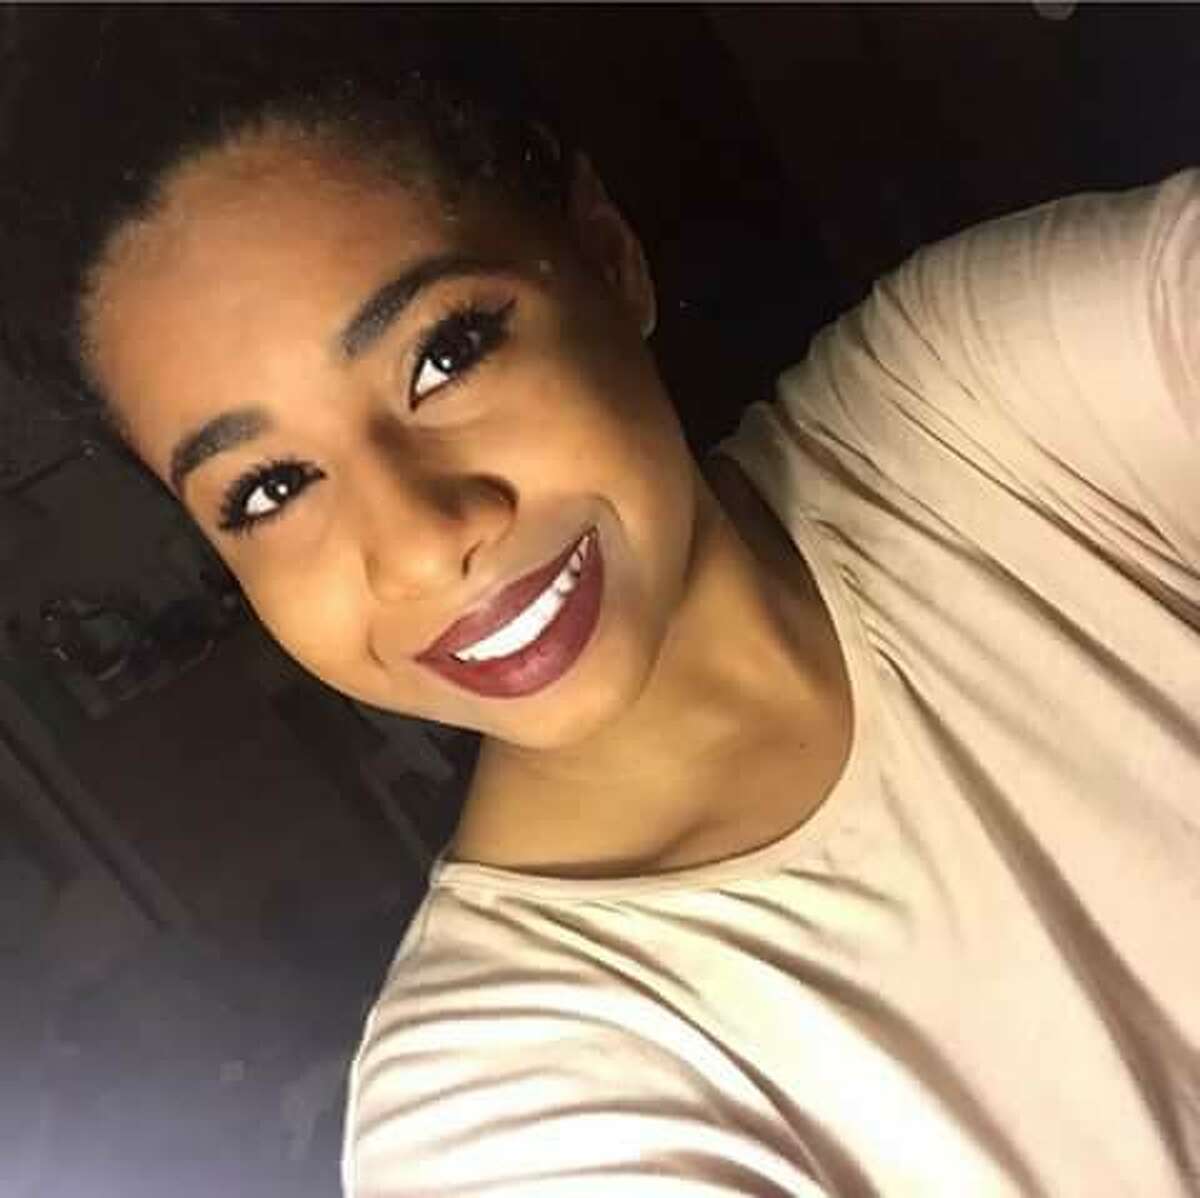 A photo of 21-year-old Rajine Martinez who was the victim of a fatal hit-and-run accident in Washington Park in Albany early Saturday, Feb. 4, 2017.(Facebook) ORG XMIT: y3uaqyL1gTMM9VMsHUSf